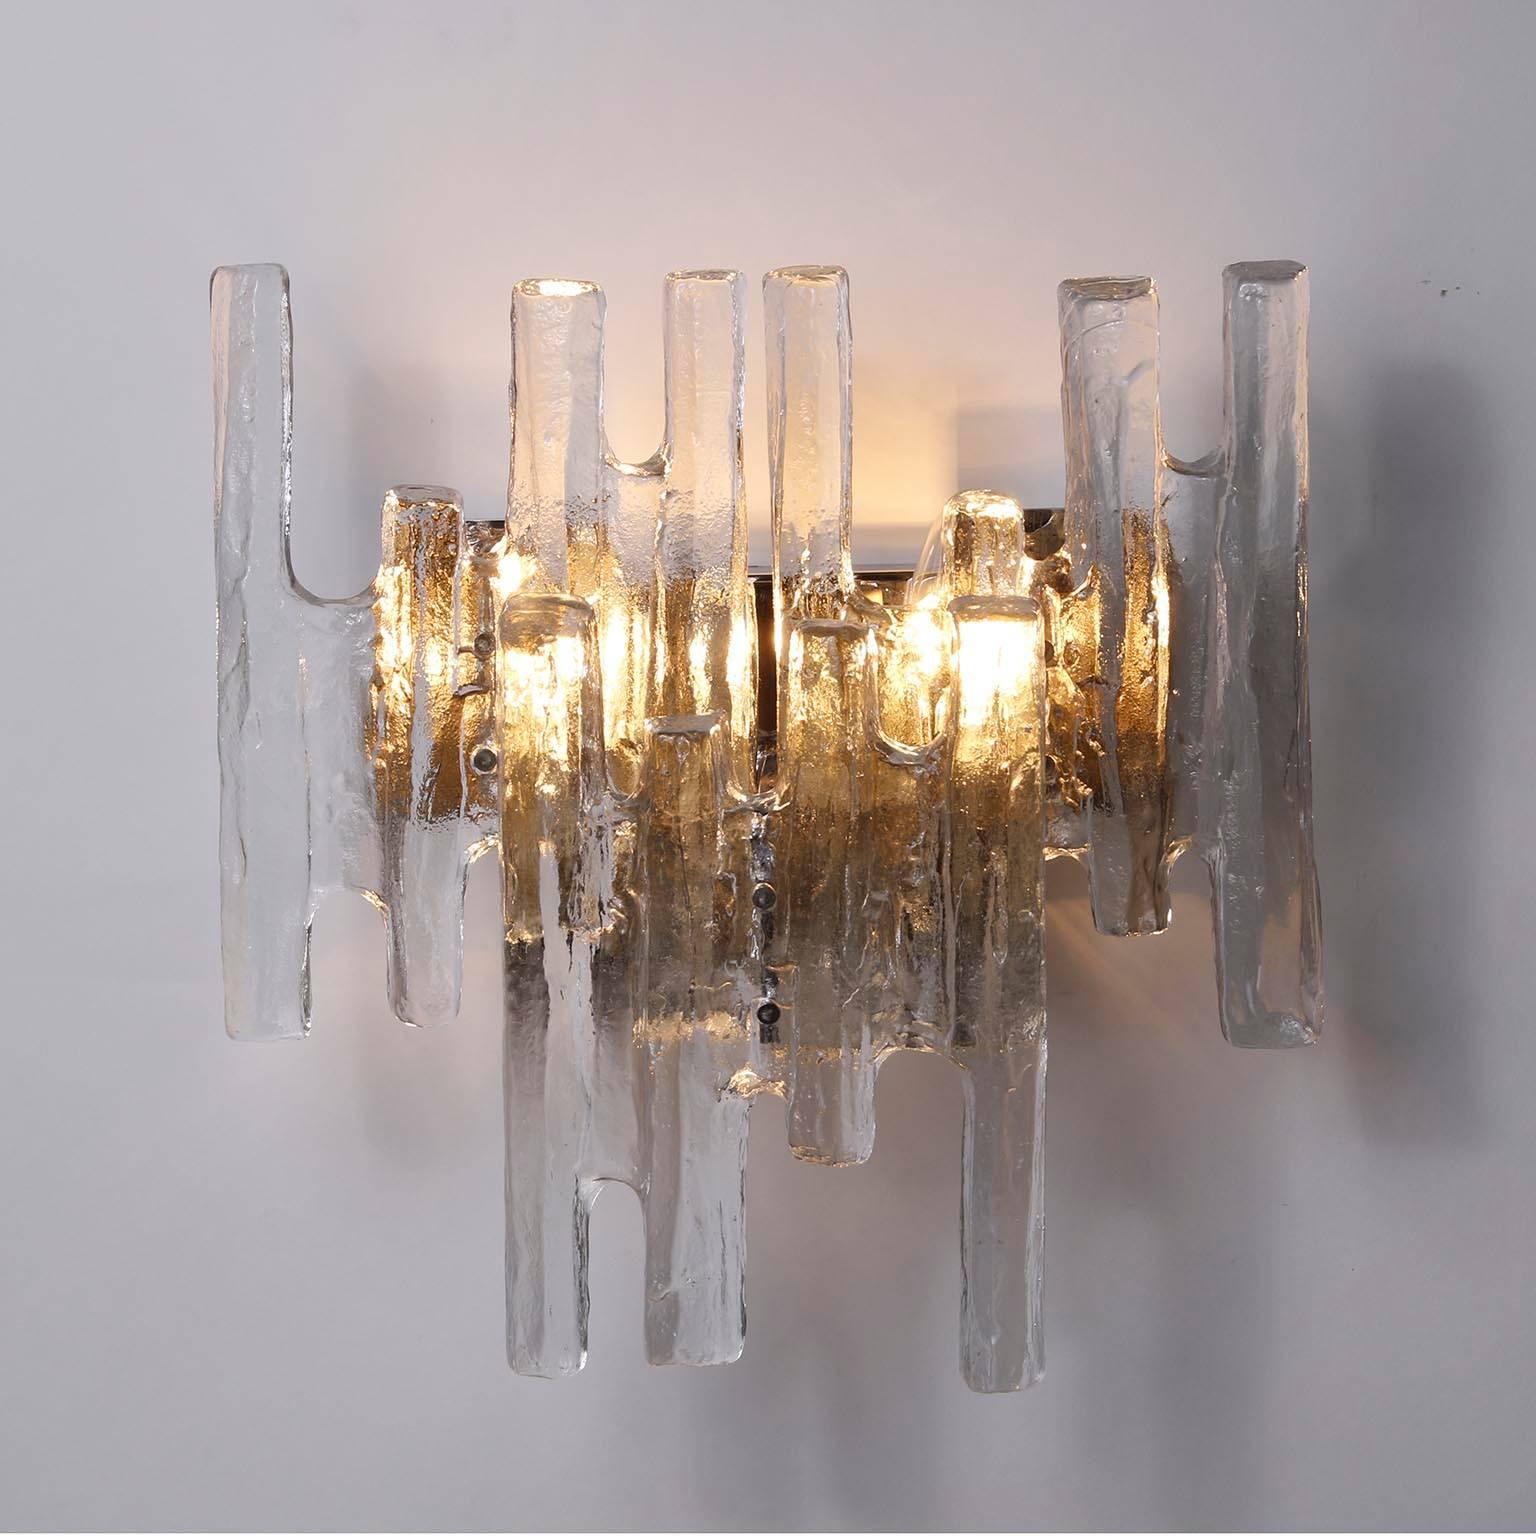 Pair Mid-Century Modern Sconces Wall Lights 'Pan' by Kalmar, Glass Nickel, 1970s For Sale 1